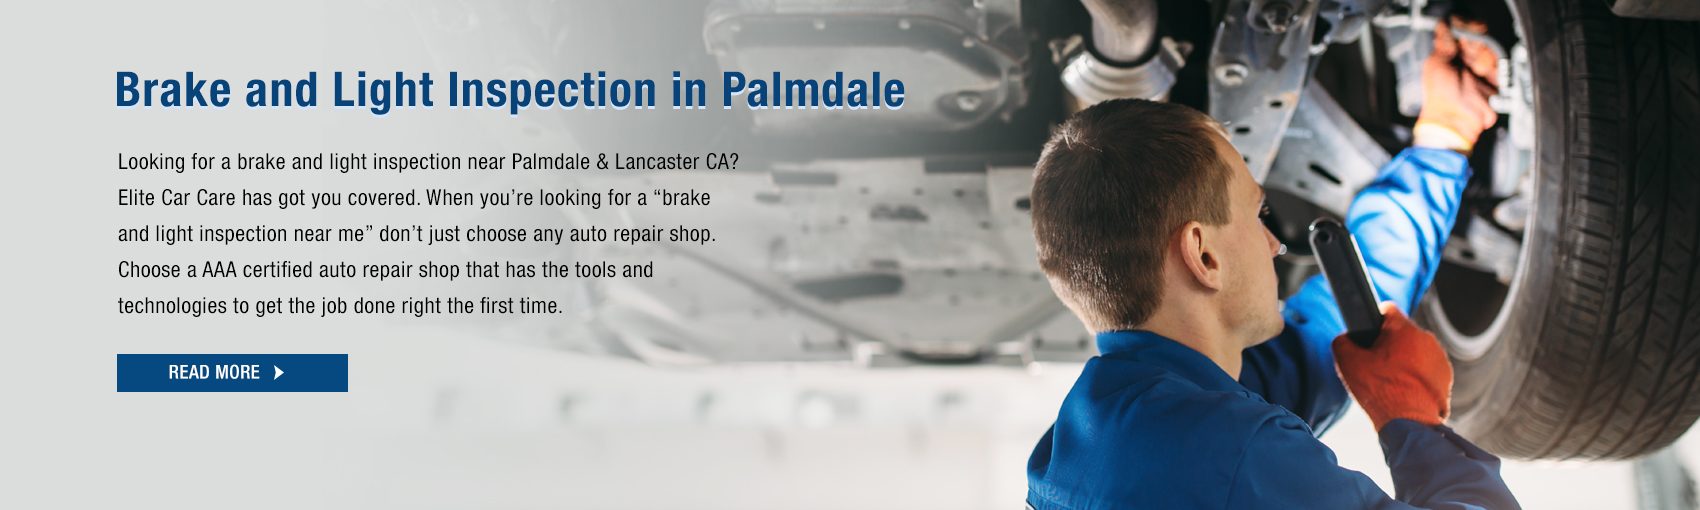 Brake and Light Inspection in Palmdale